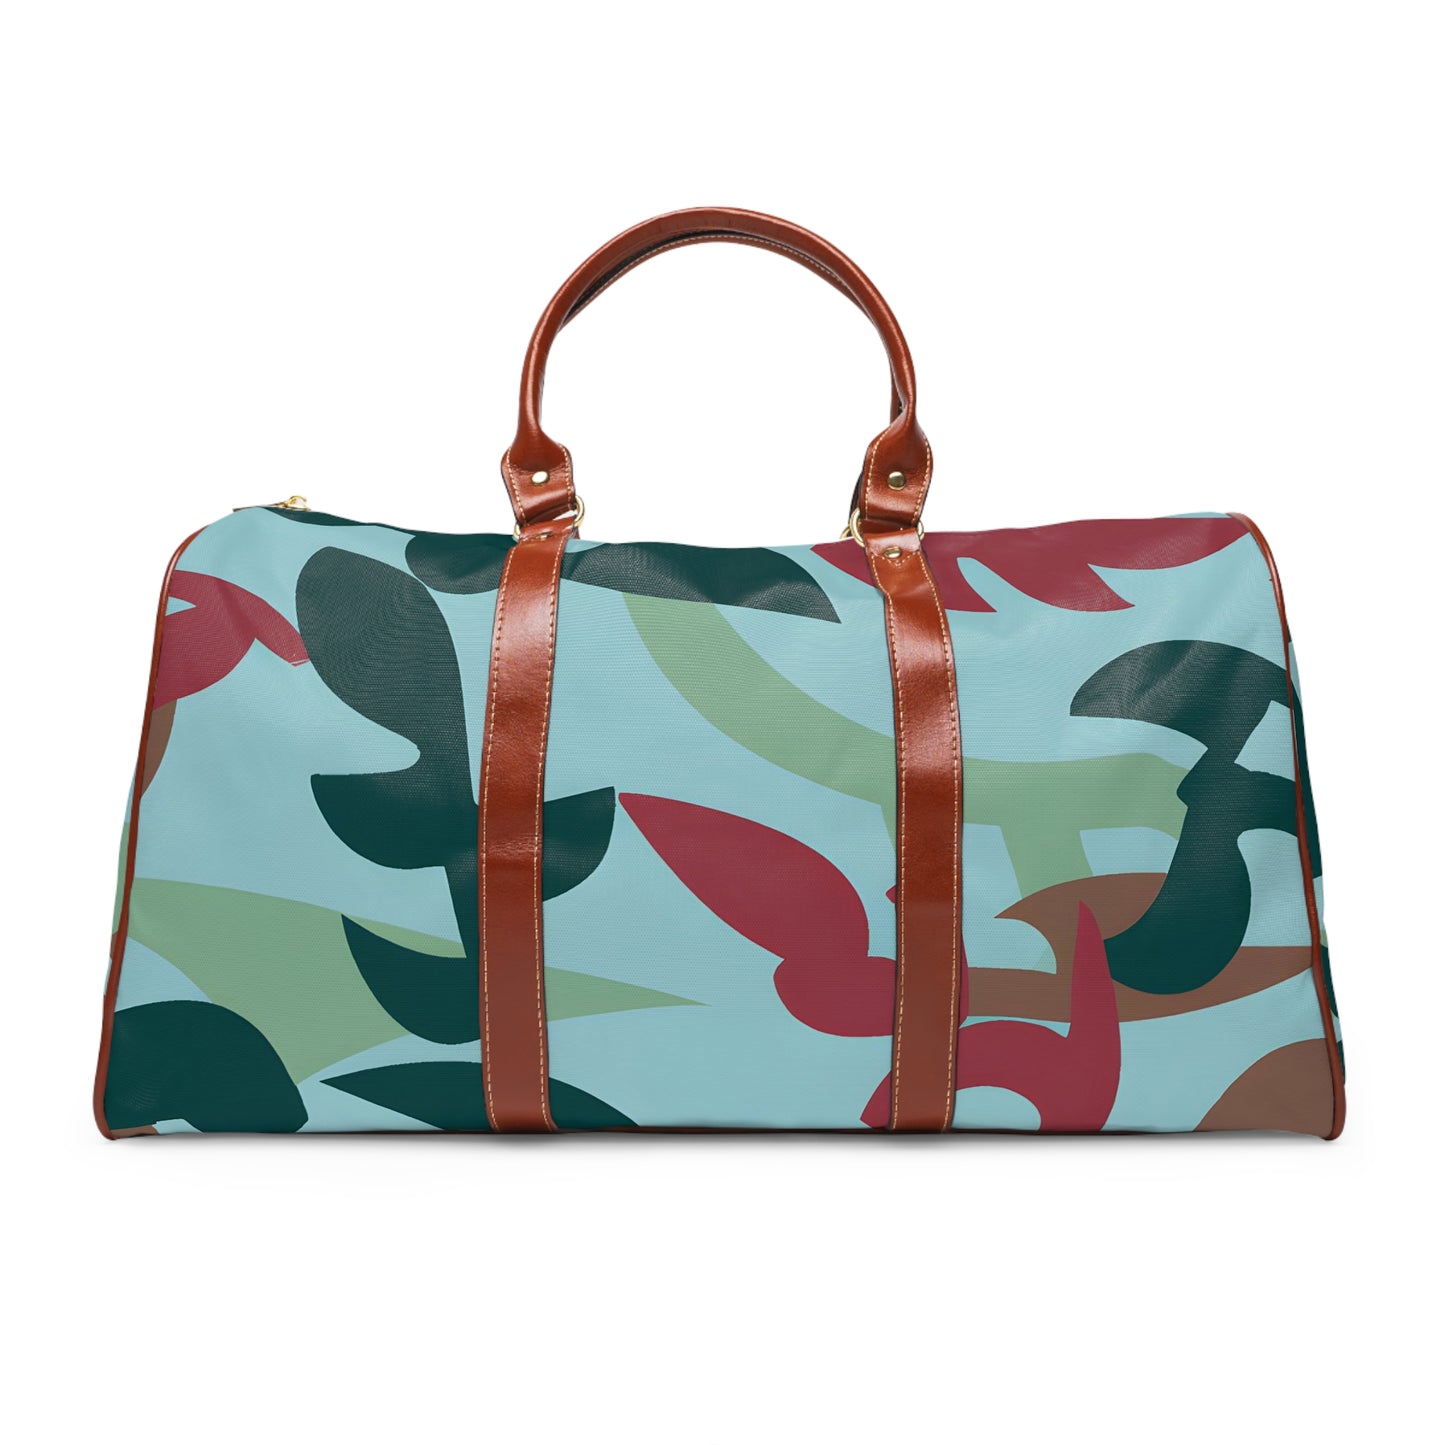 Chaparral Ione - Water-resistant Travel Bag